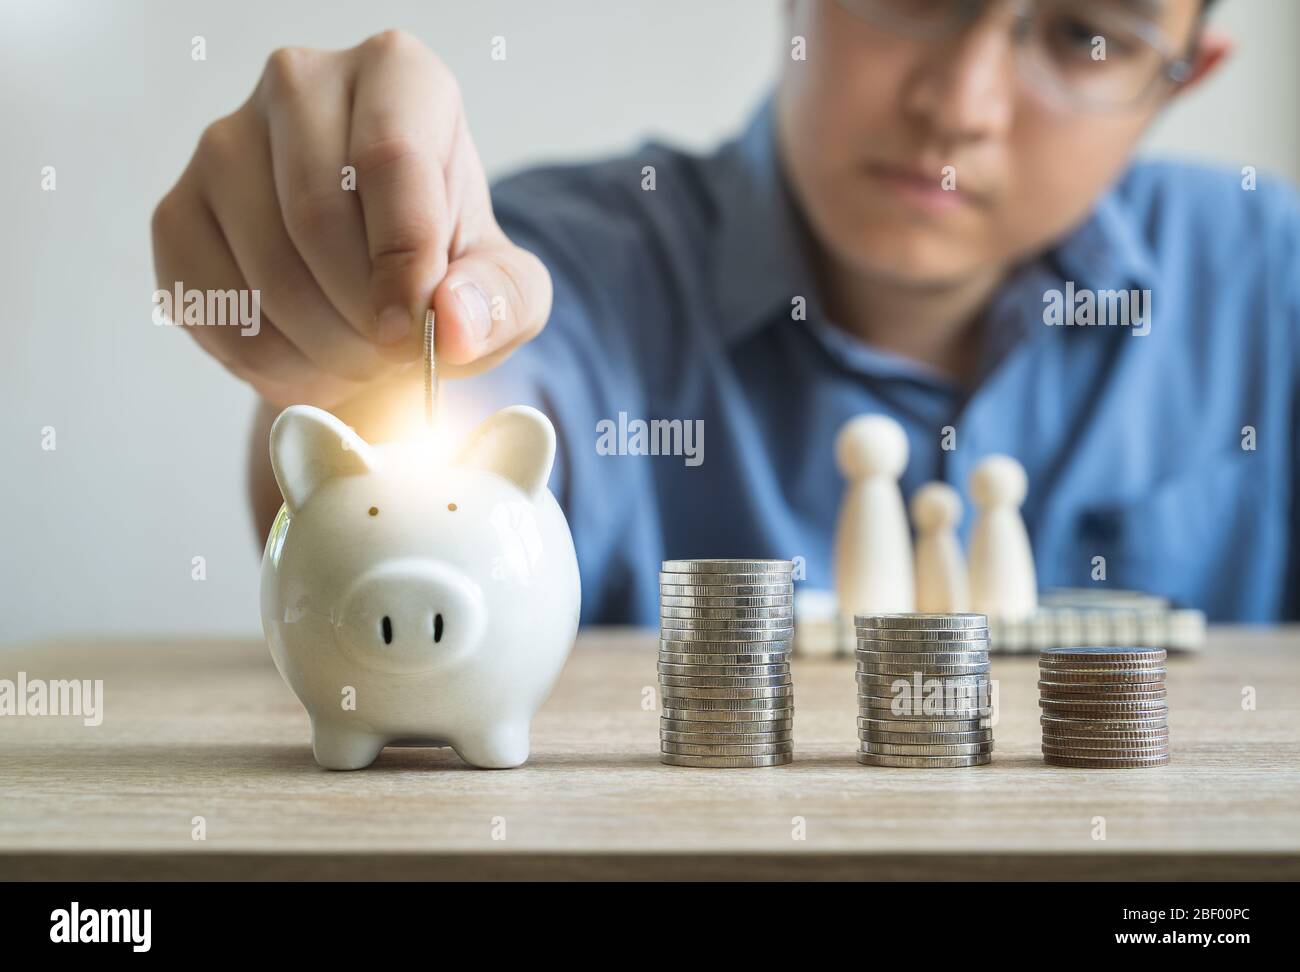 Money savings concepts  piggy bank and stack coins with blur Men are coining in piggy bank for saving money for families with family wooden dolls Stock Photo